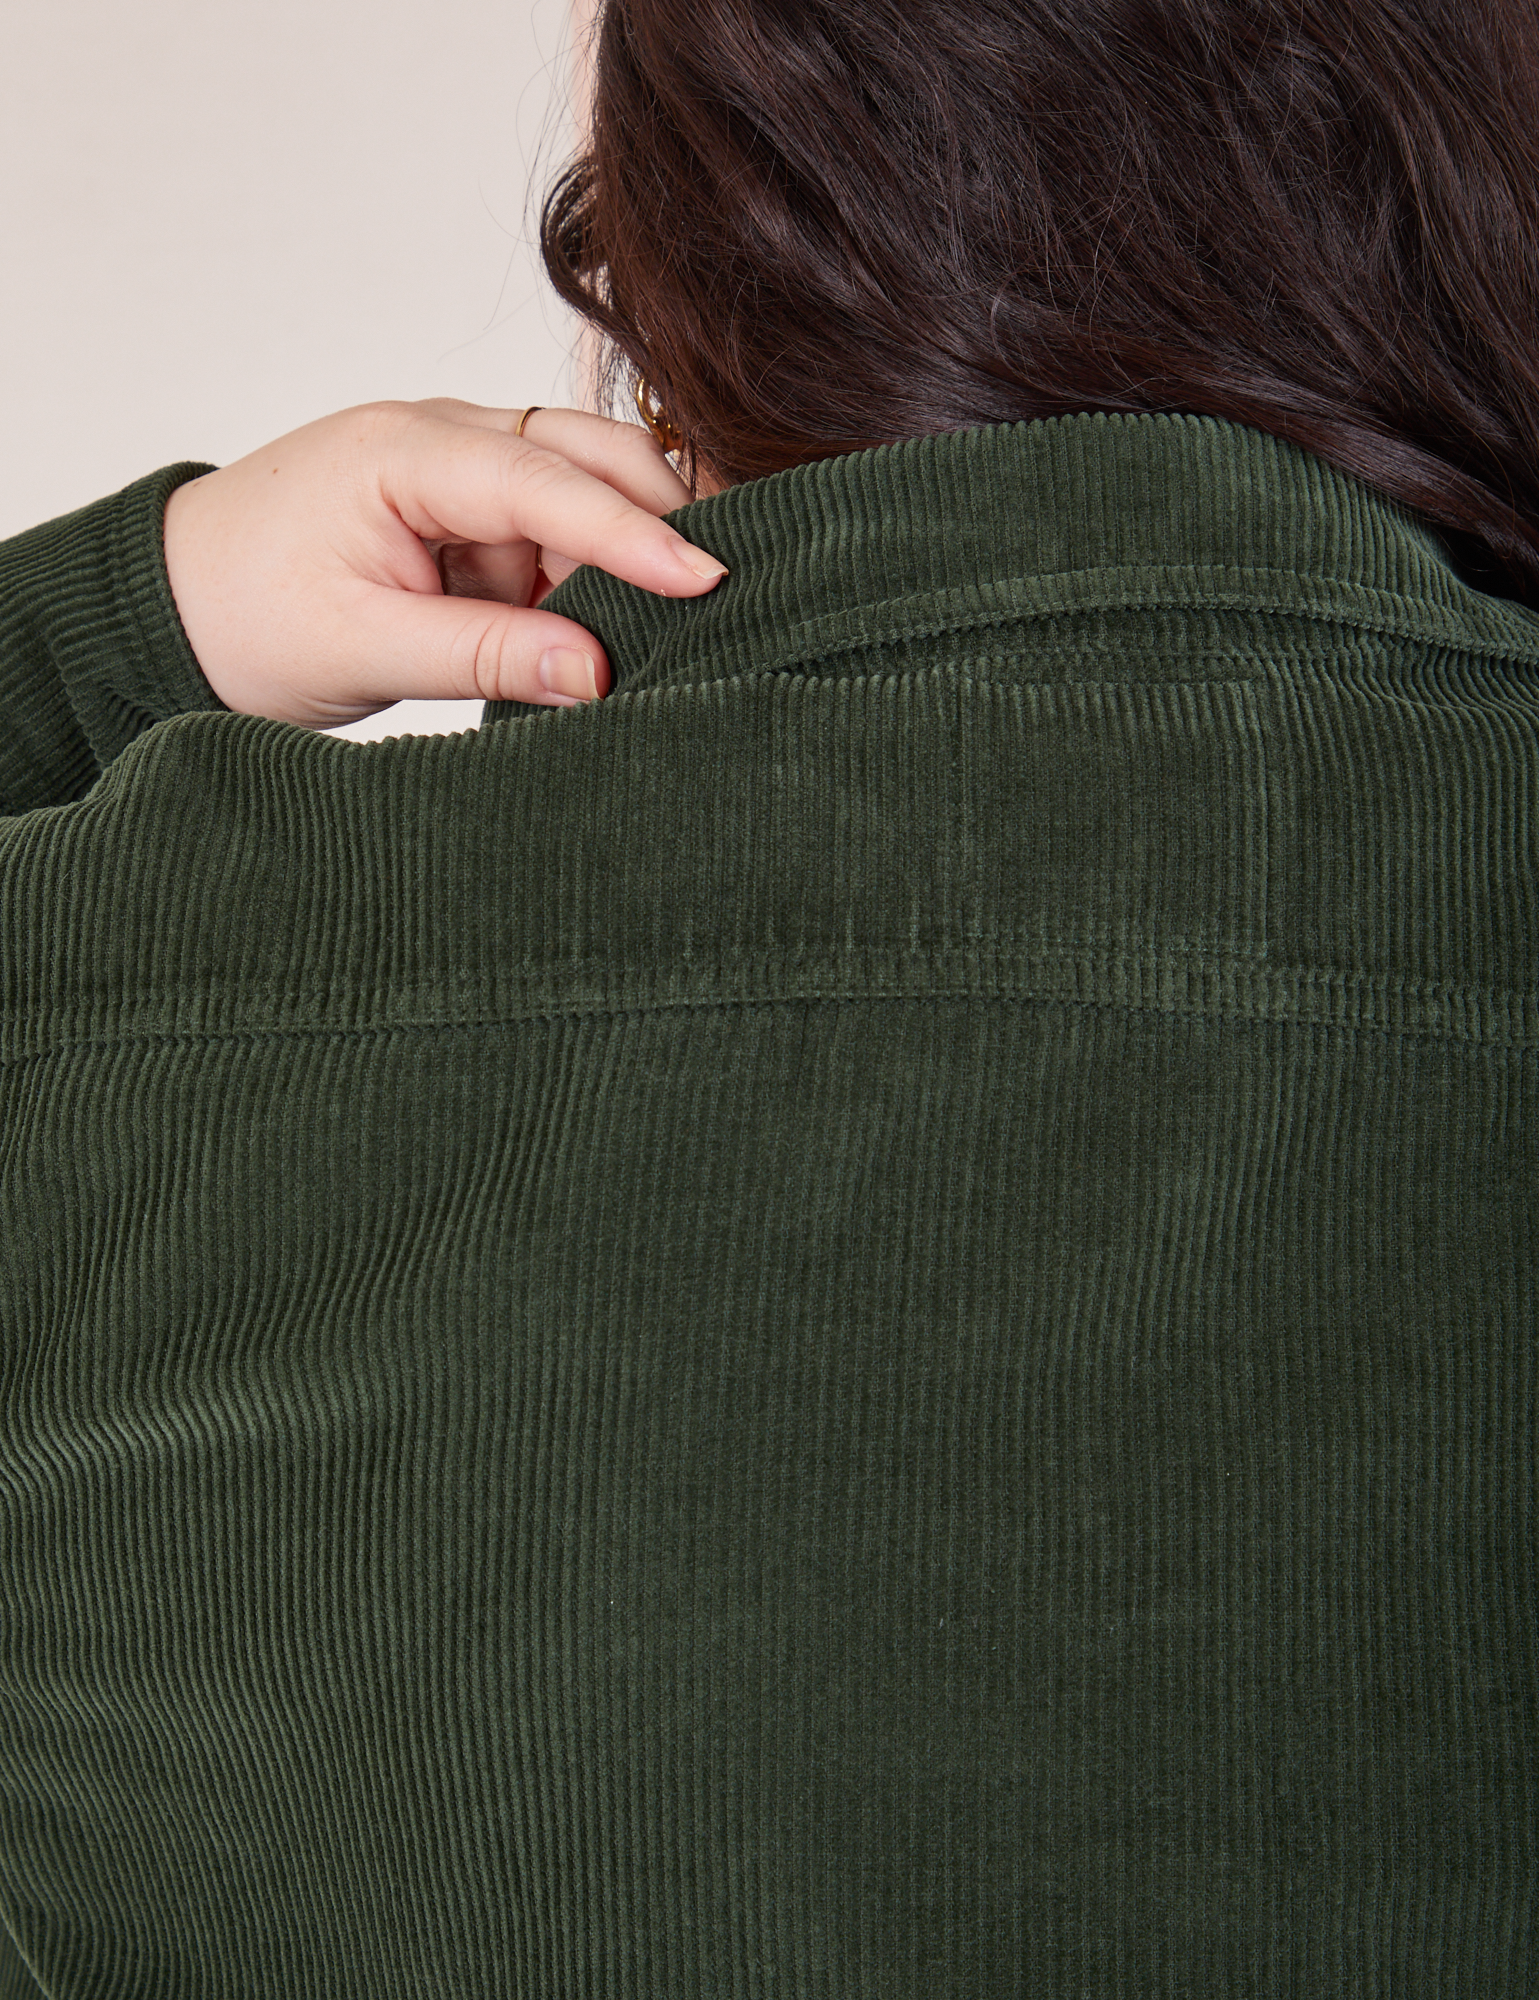 Back view collar close up of Corduroy Overshirt in Swamp Green on Ashley